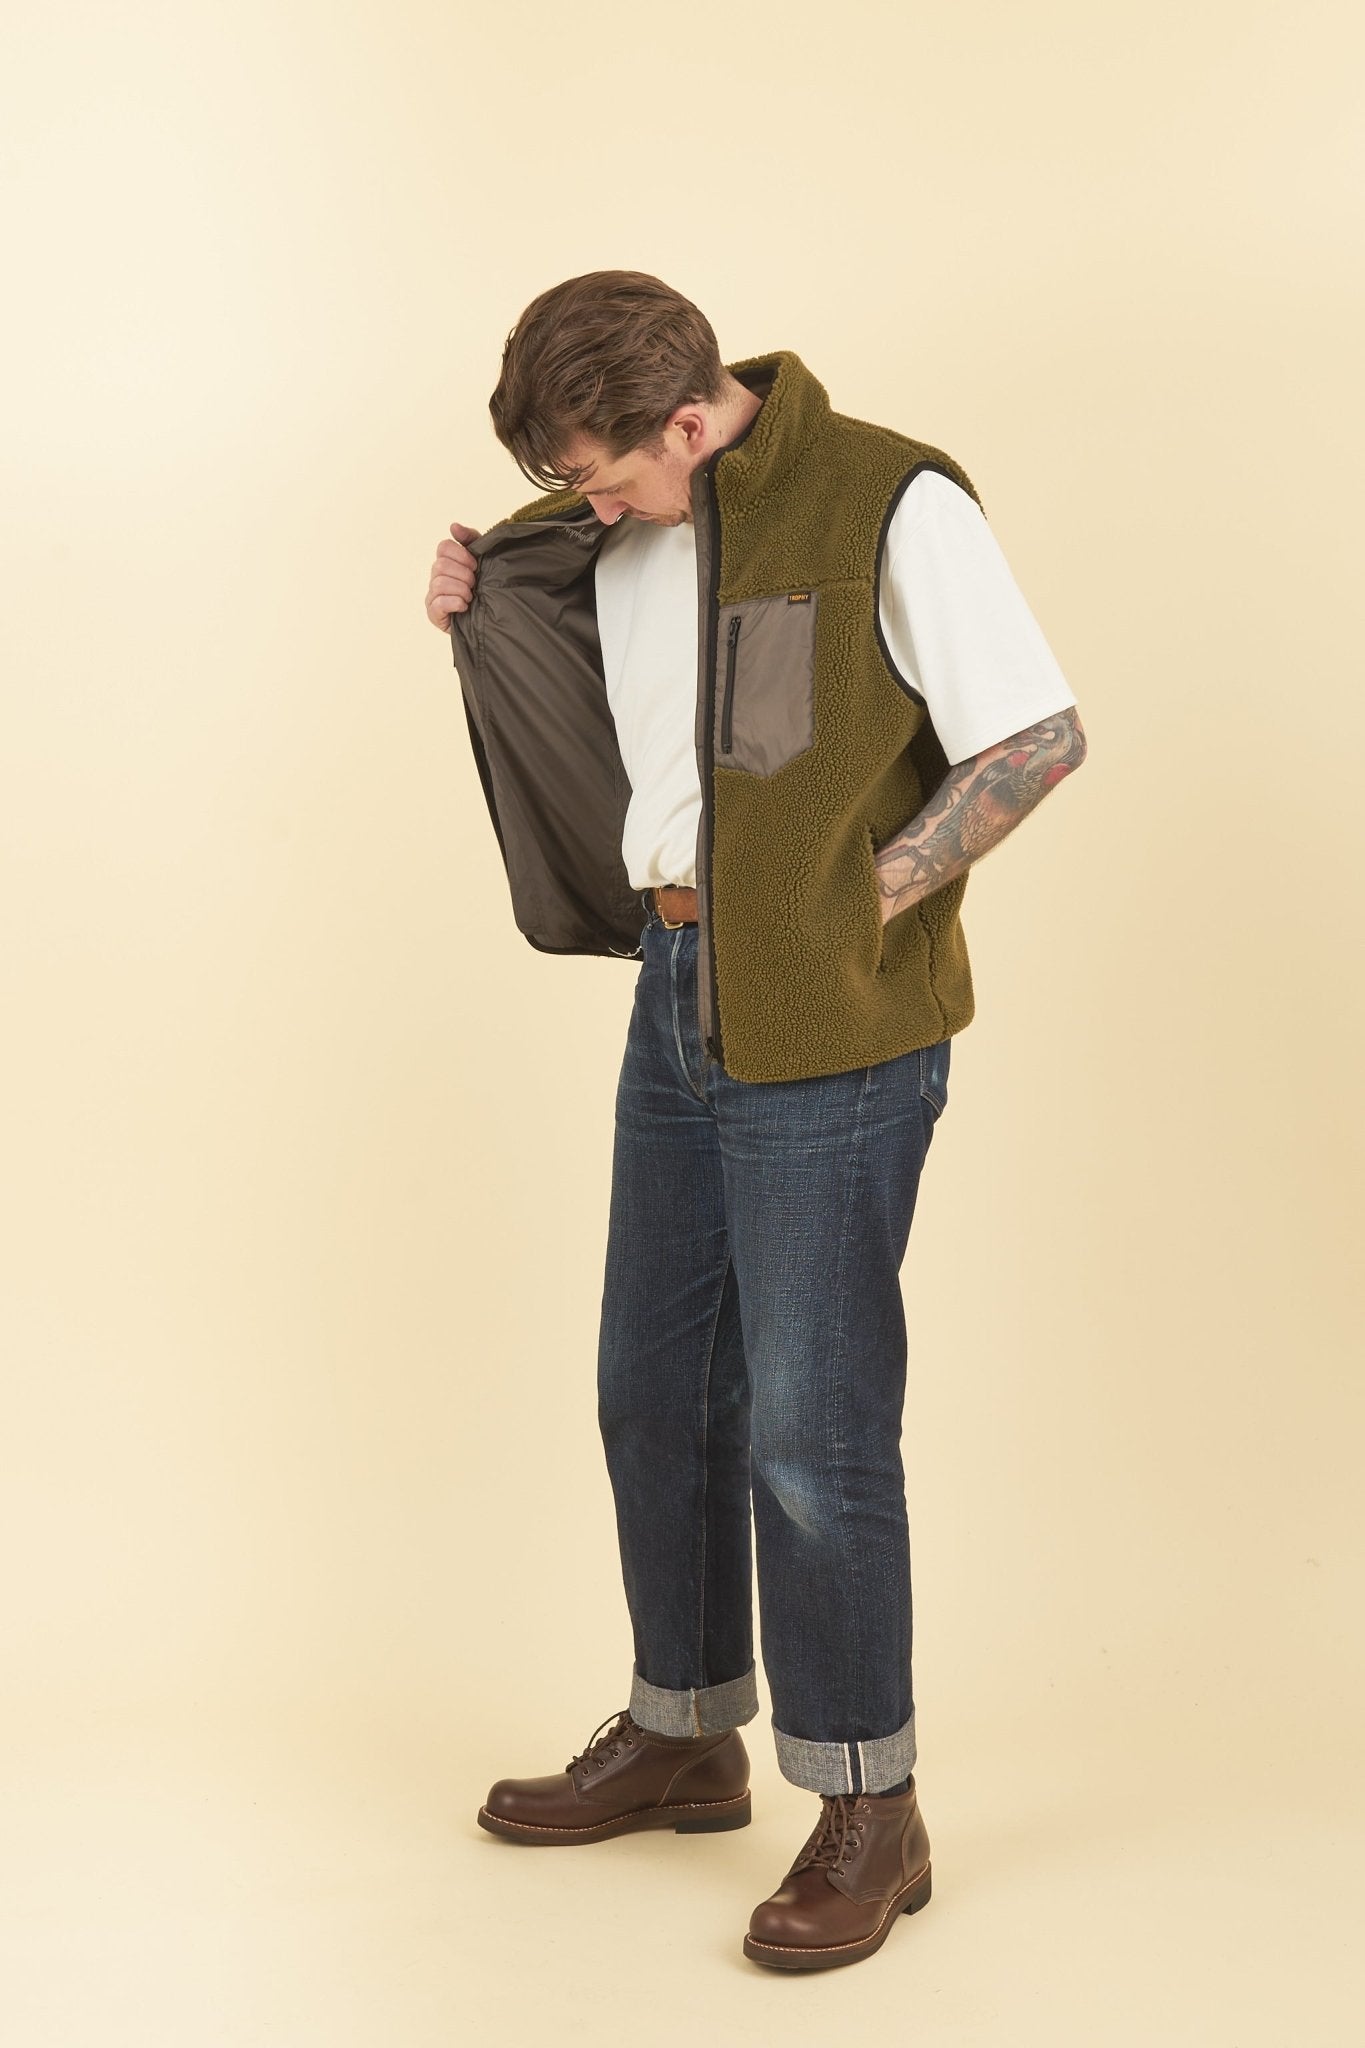 Trophy Clothing Reversible Mountain Vest - Olive/Charcoal -Trophy Clothing - URAHARA